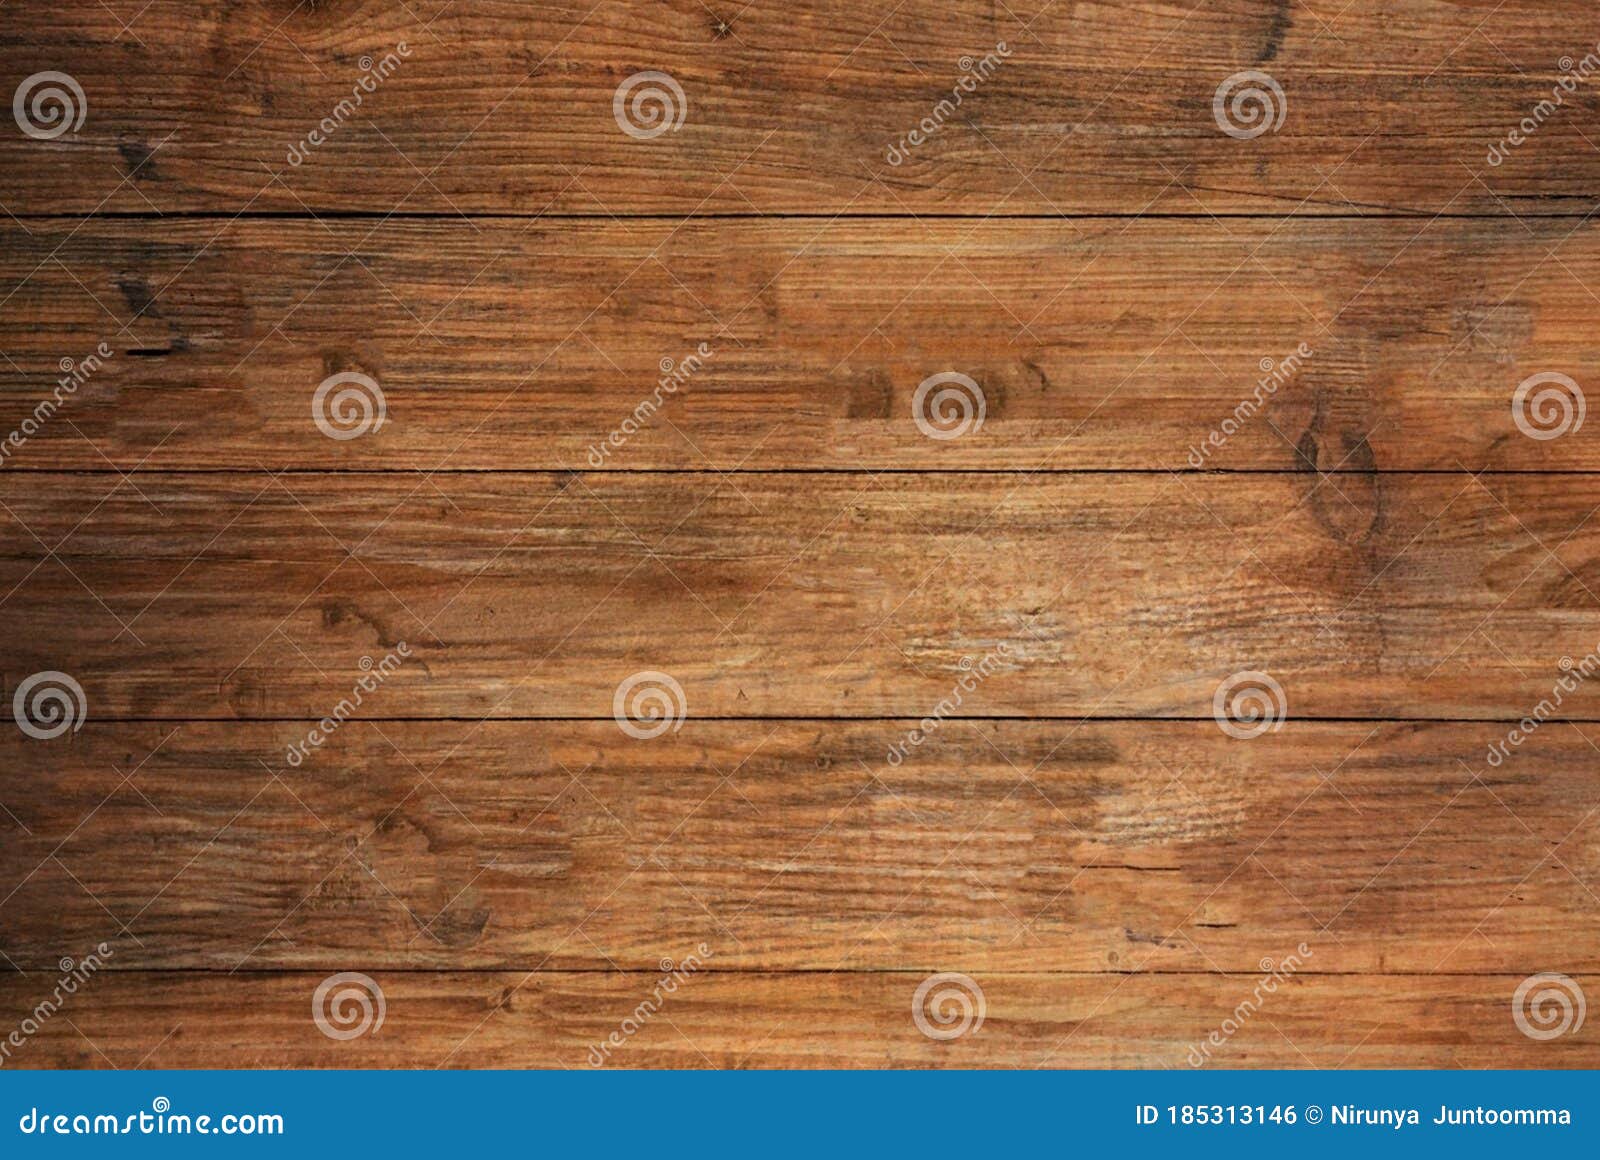 wood backdrop Rustic Wood digital scrapbook paper 12x12 printable wooden board texture nature sign pattern photography background download